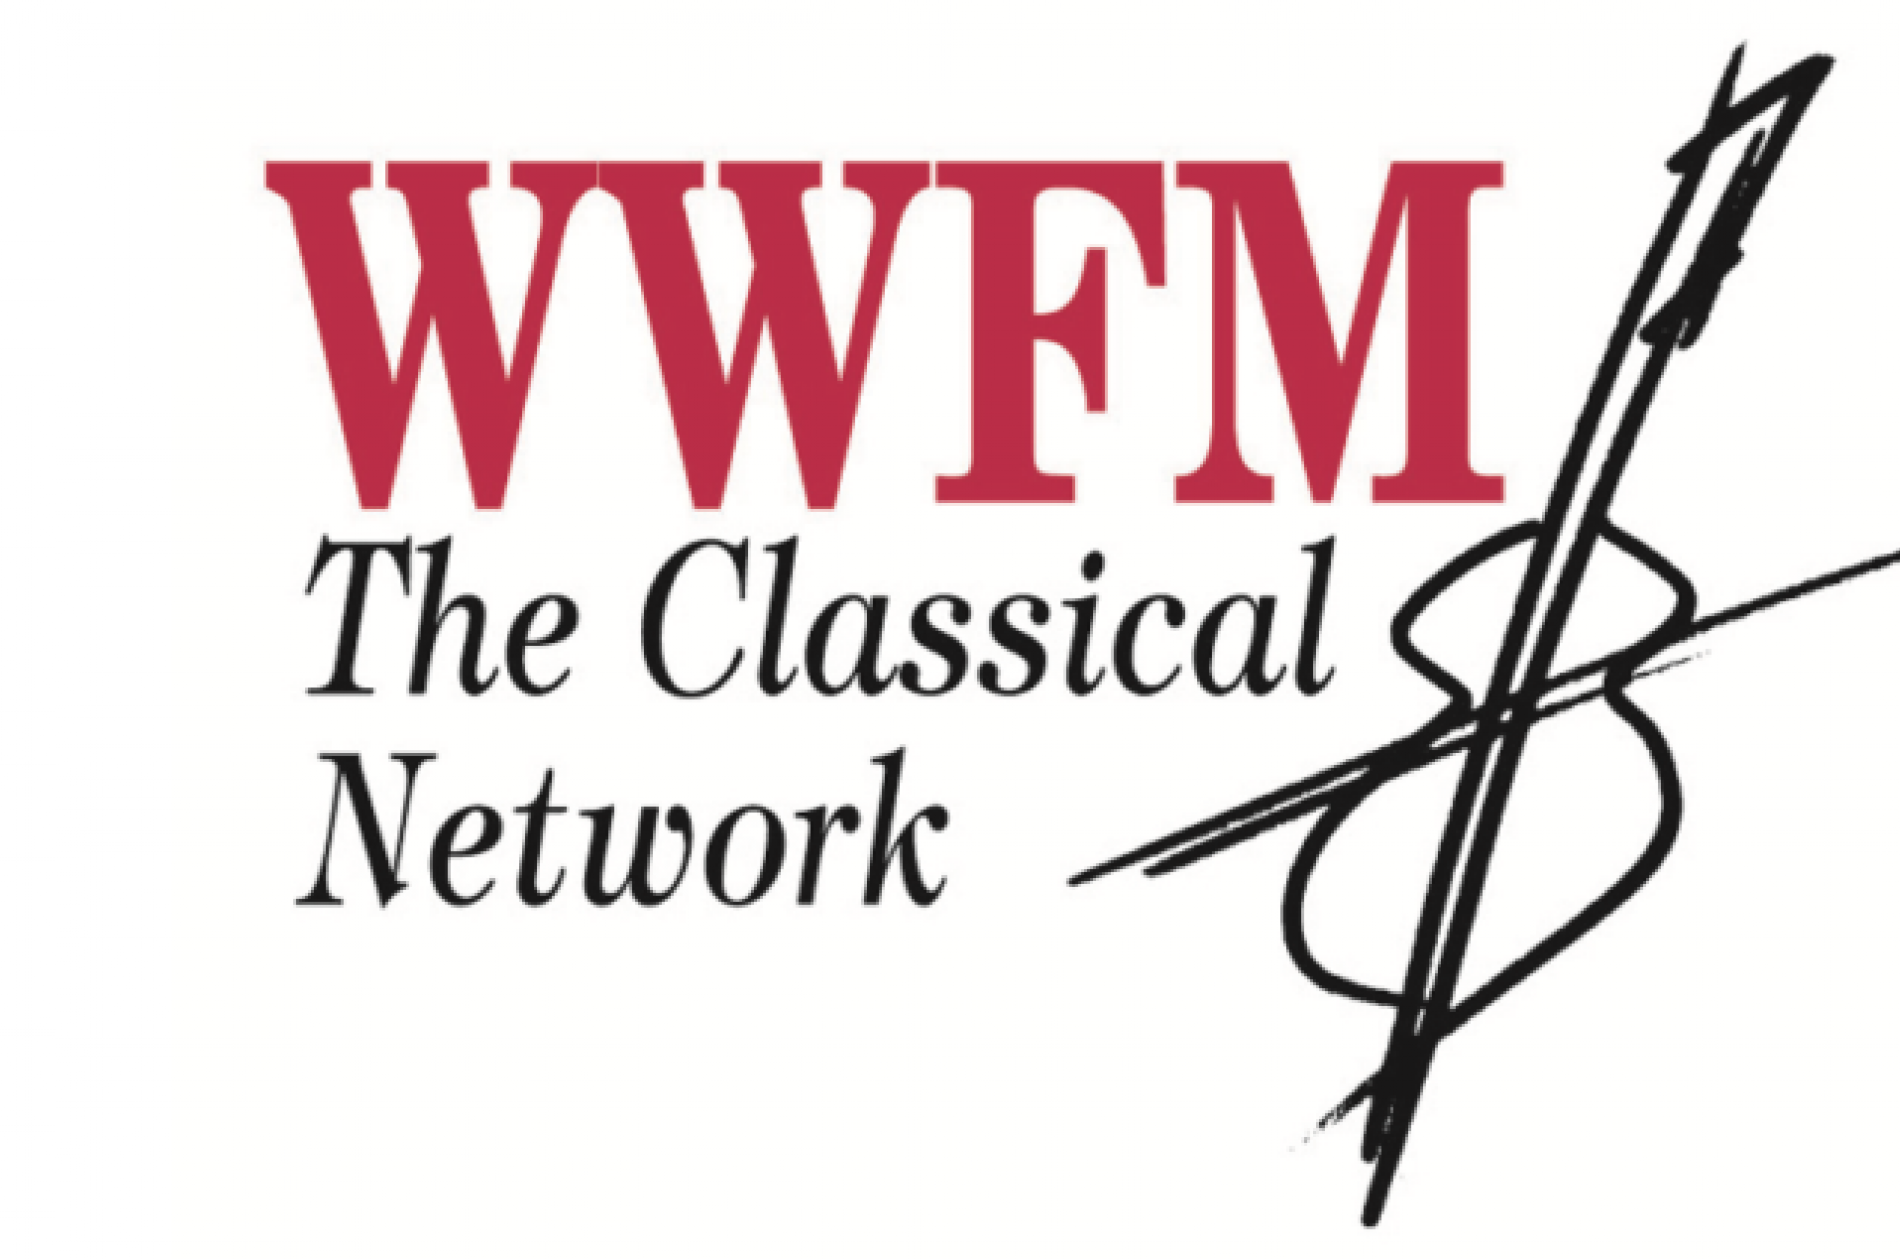 WWFM - The Classical Network